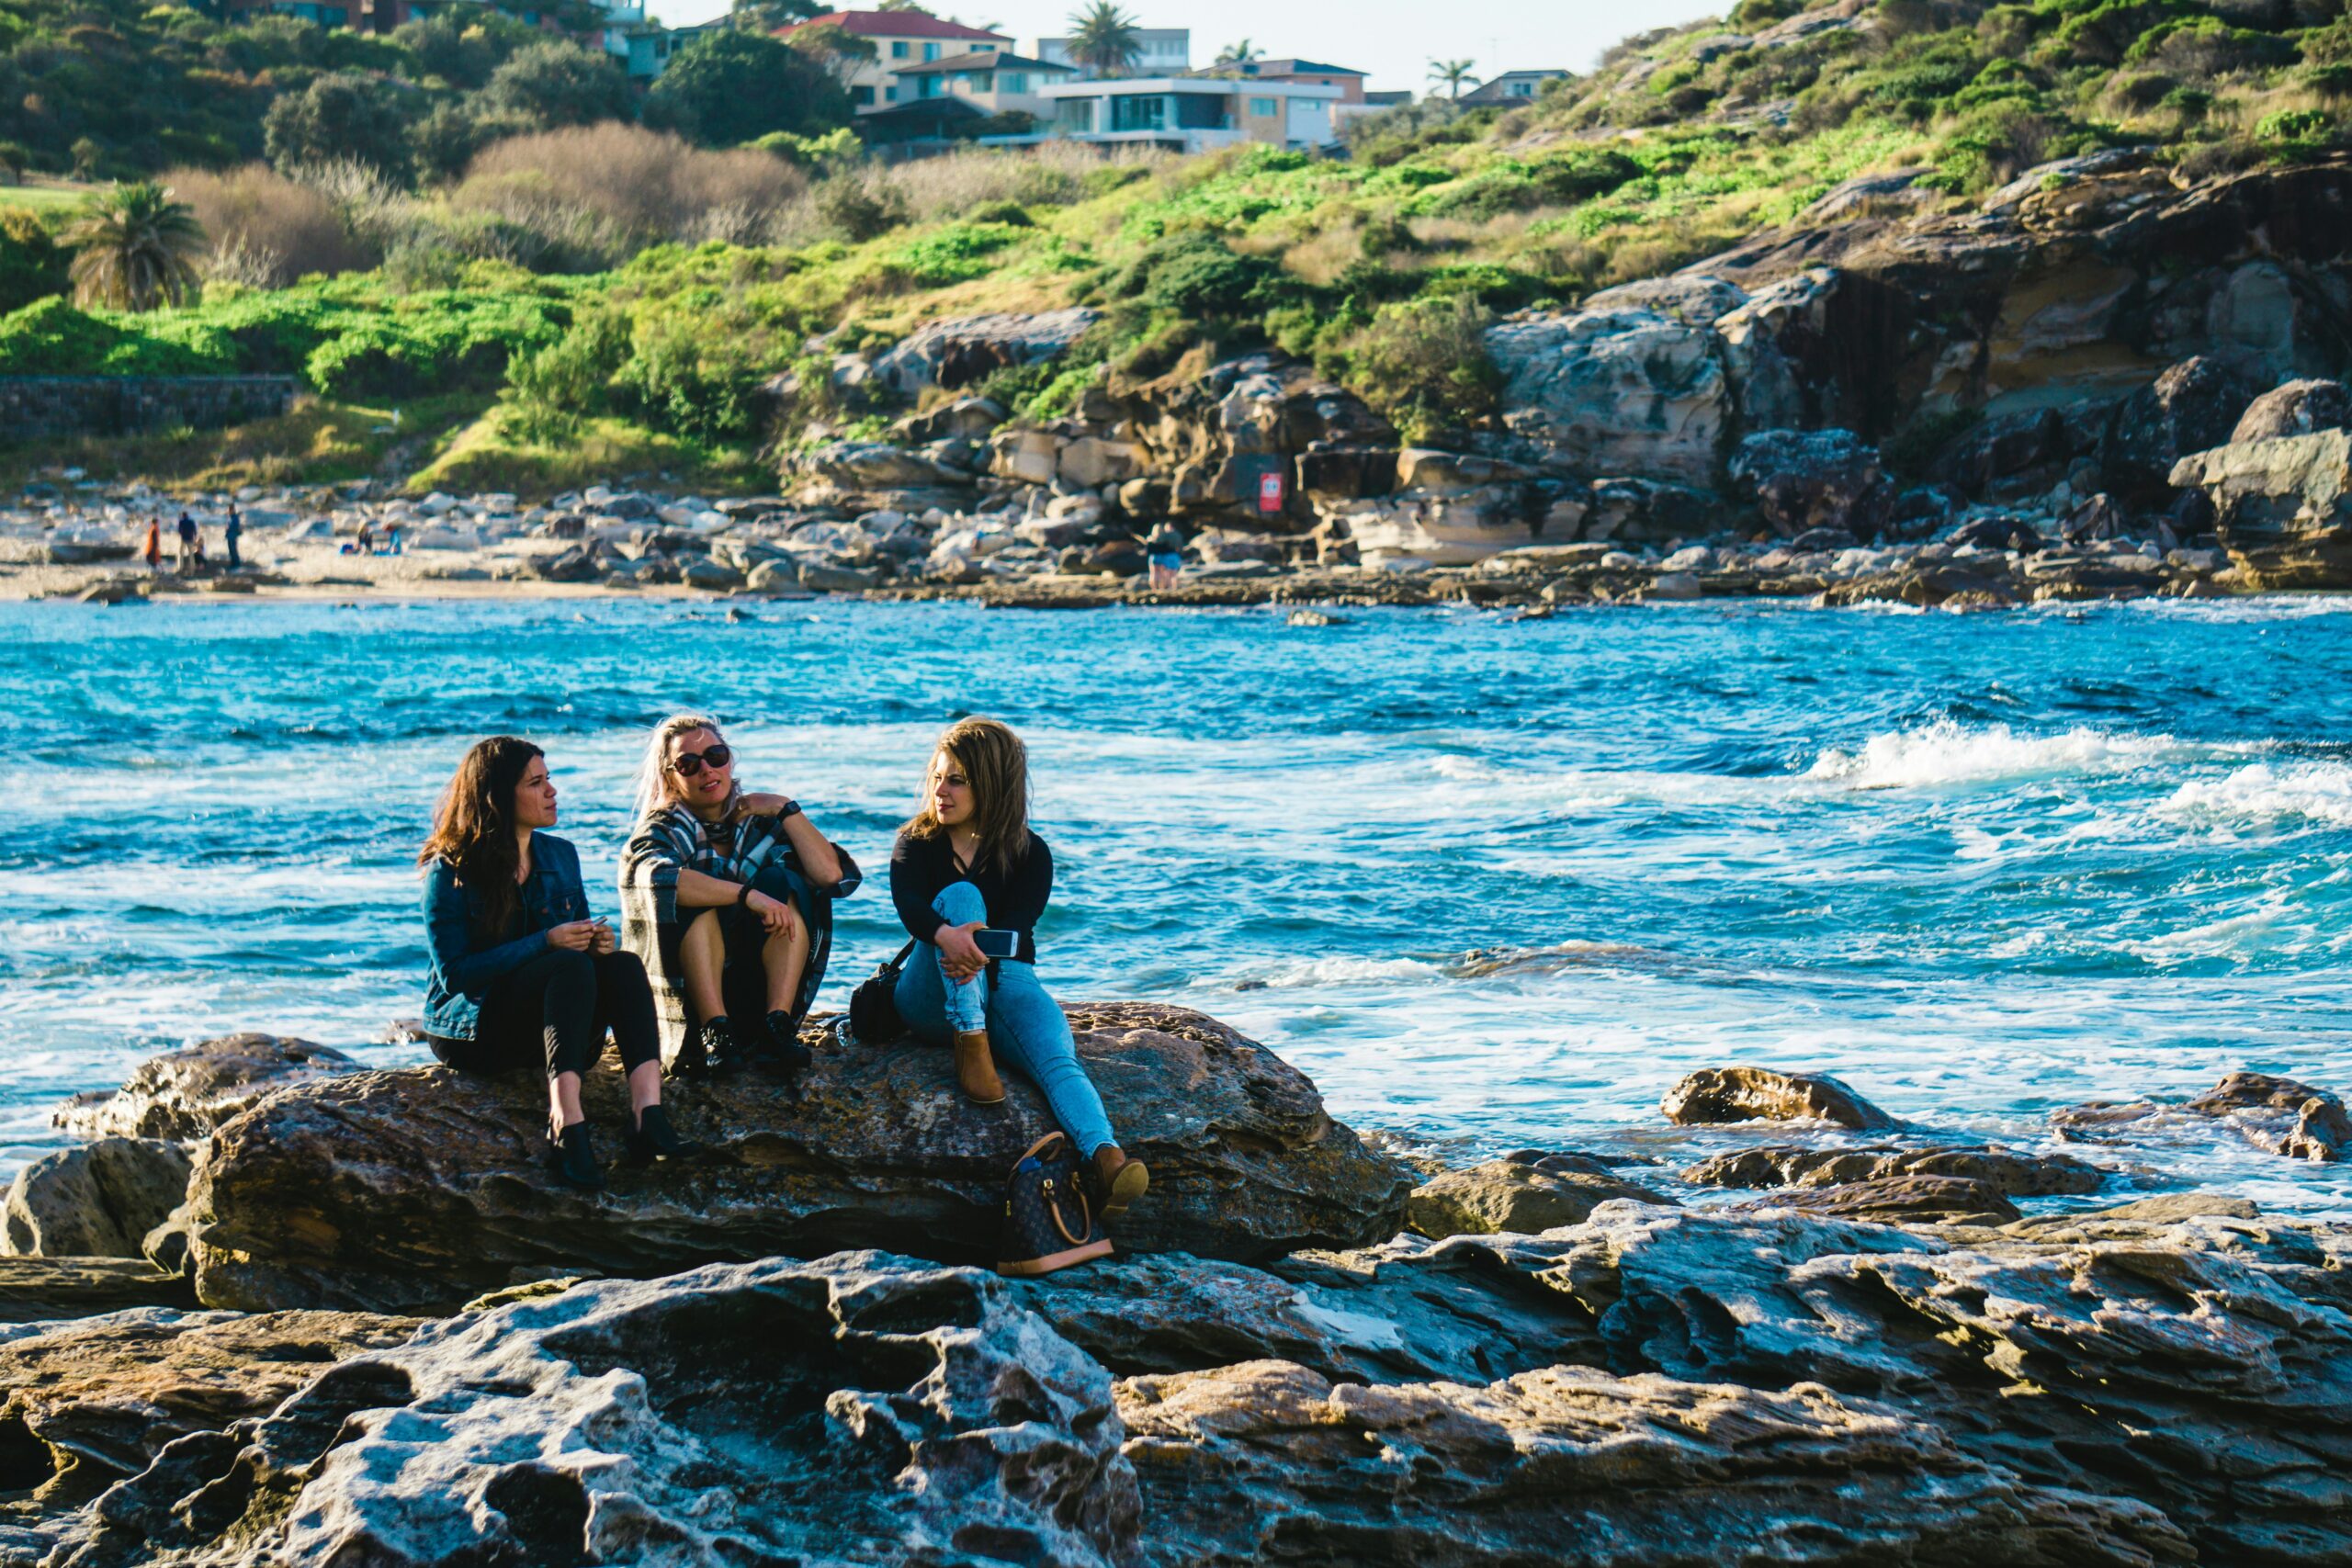 Three sibling teens sitting on a rock by the beach. Looking for a family therapist to help your children reconnect? Call today for support in St Pete, FL.